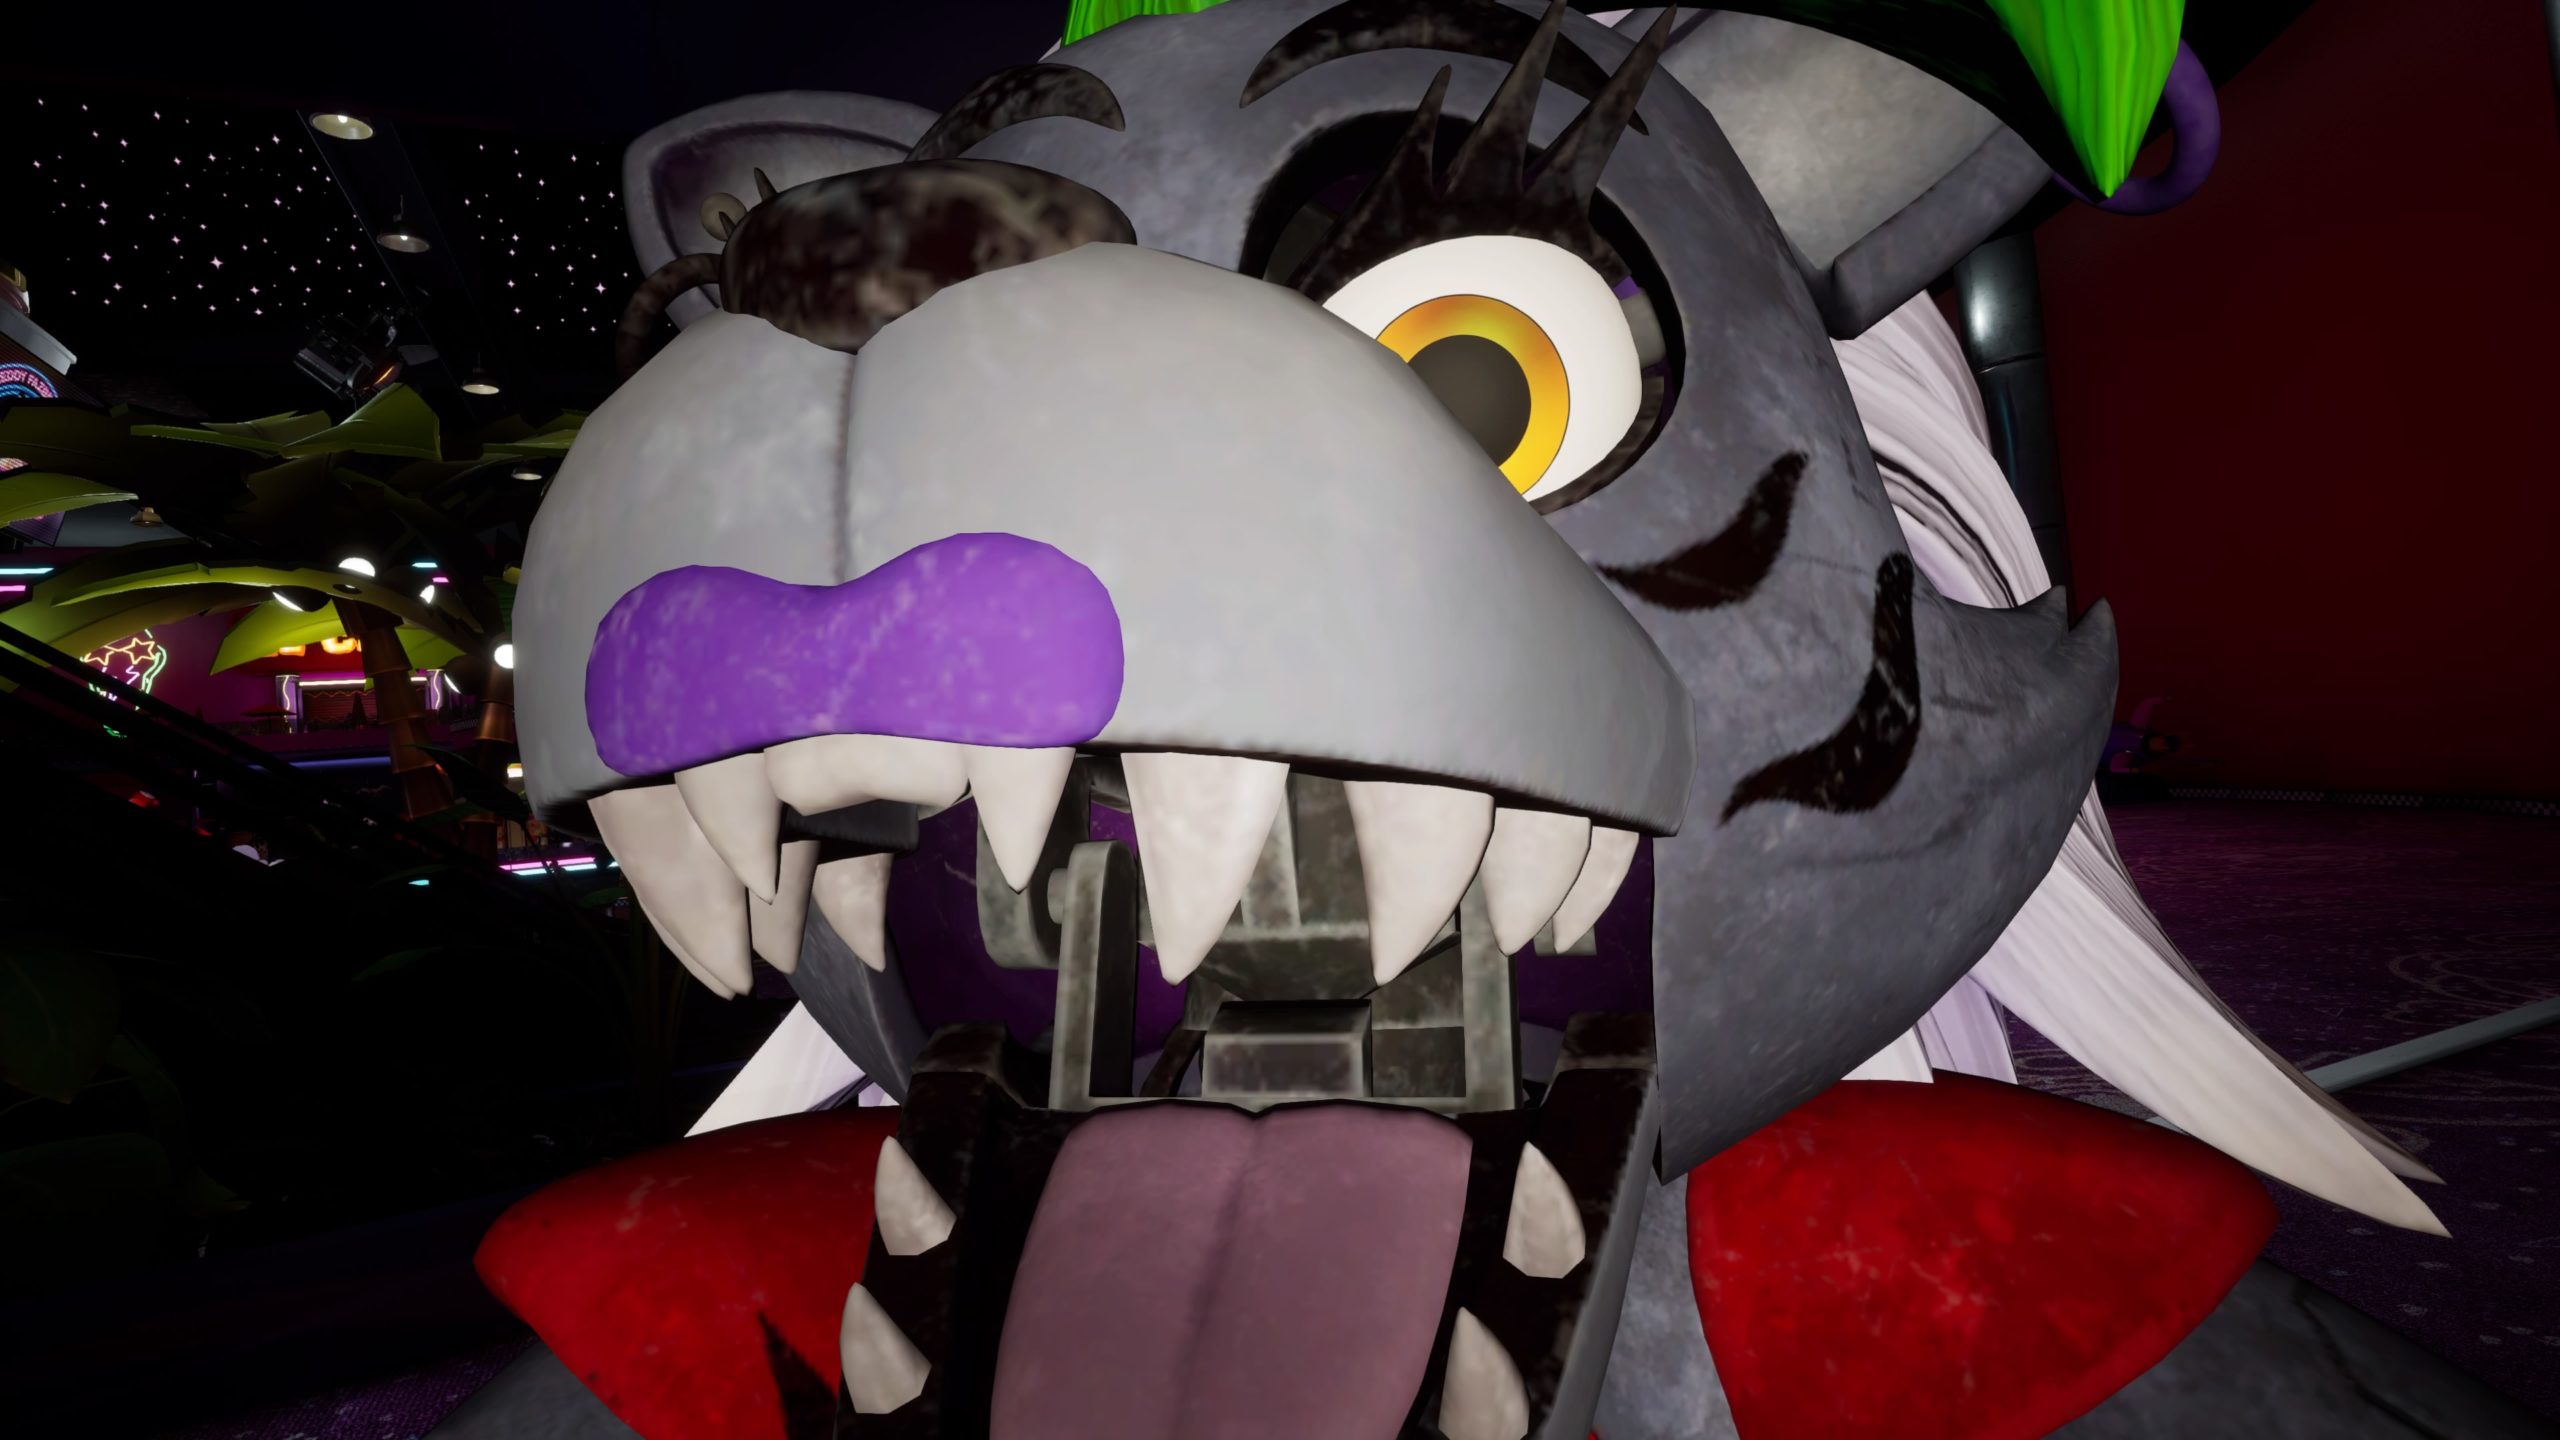 Will Roxy Be on Our Side?, FNAF Theory